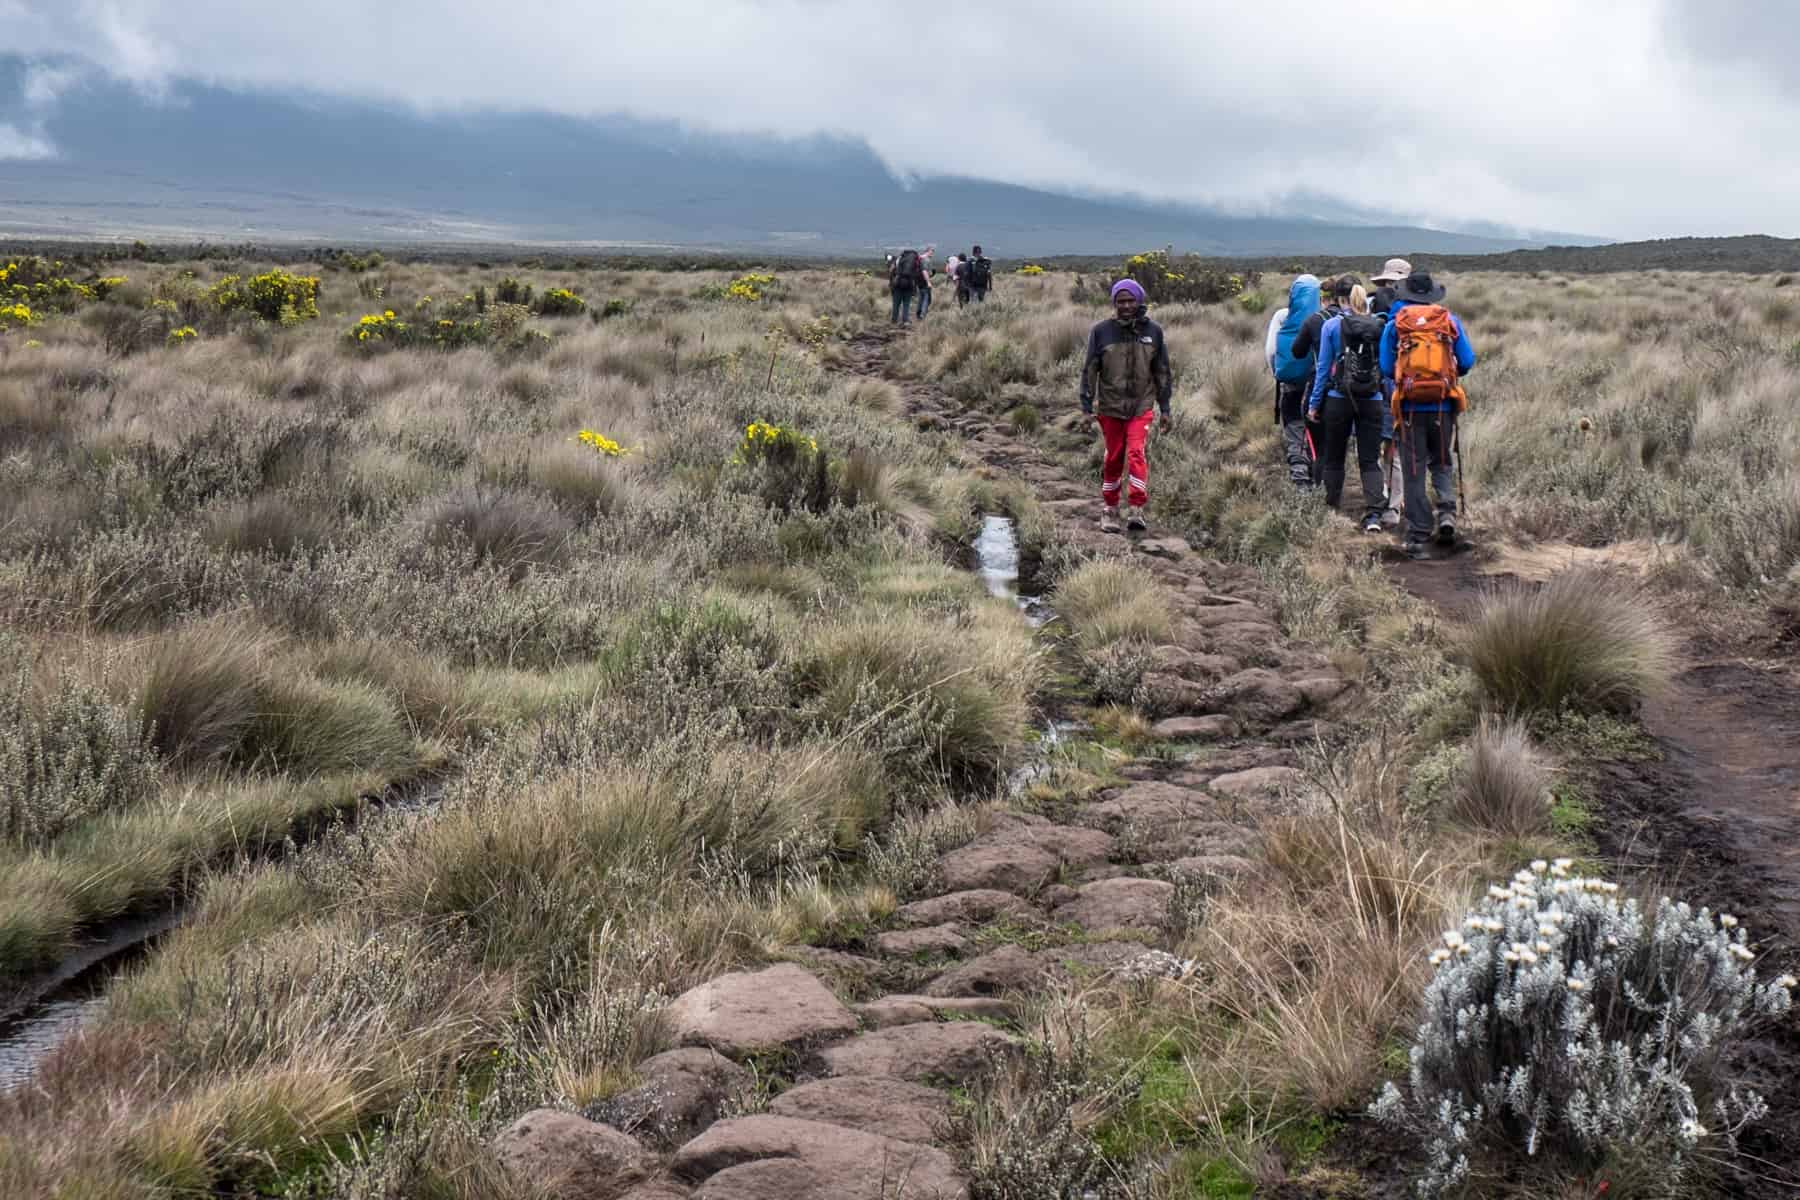 A Kilimanjaro porter (in red trousers) walks from the camp over the grassy earth, towards the arriving trekkers to help them.